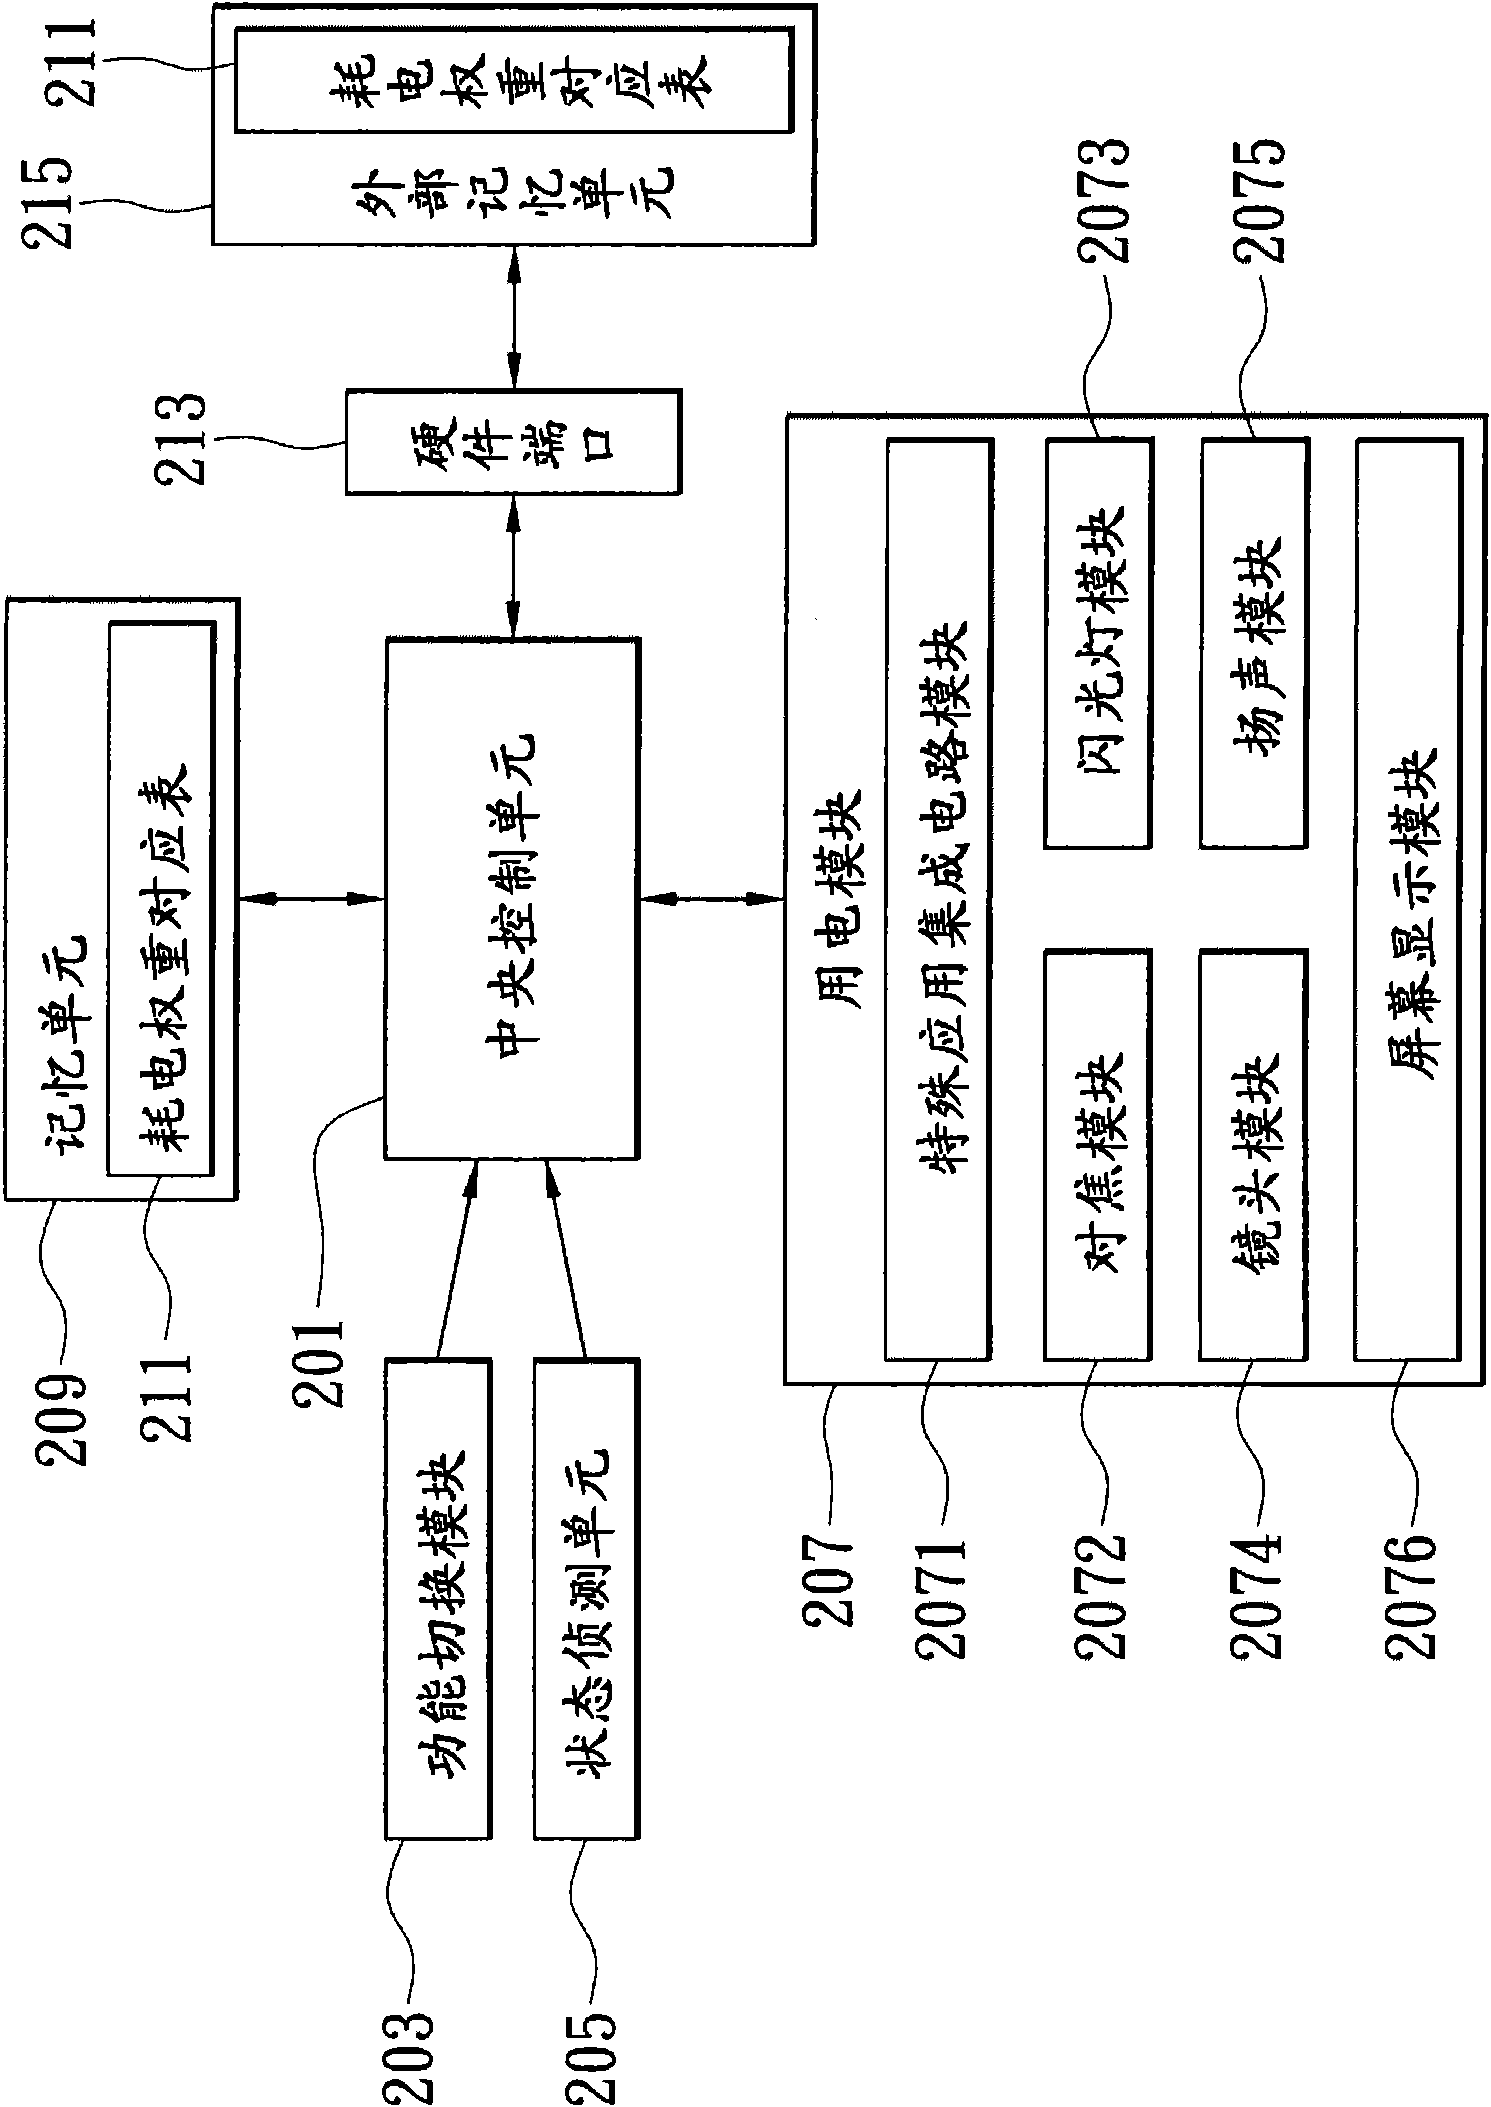 Digital camera device with power consumption management and power consumption management system and method thereof